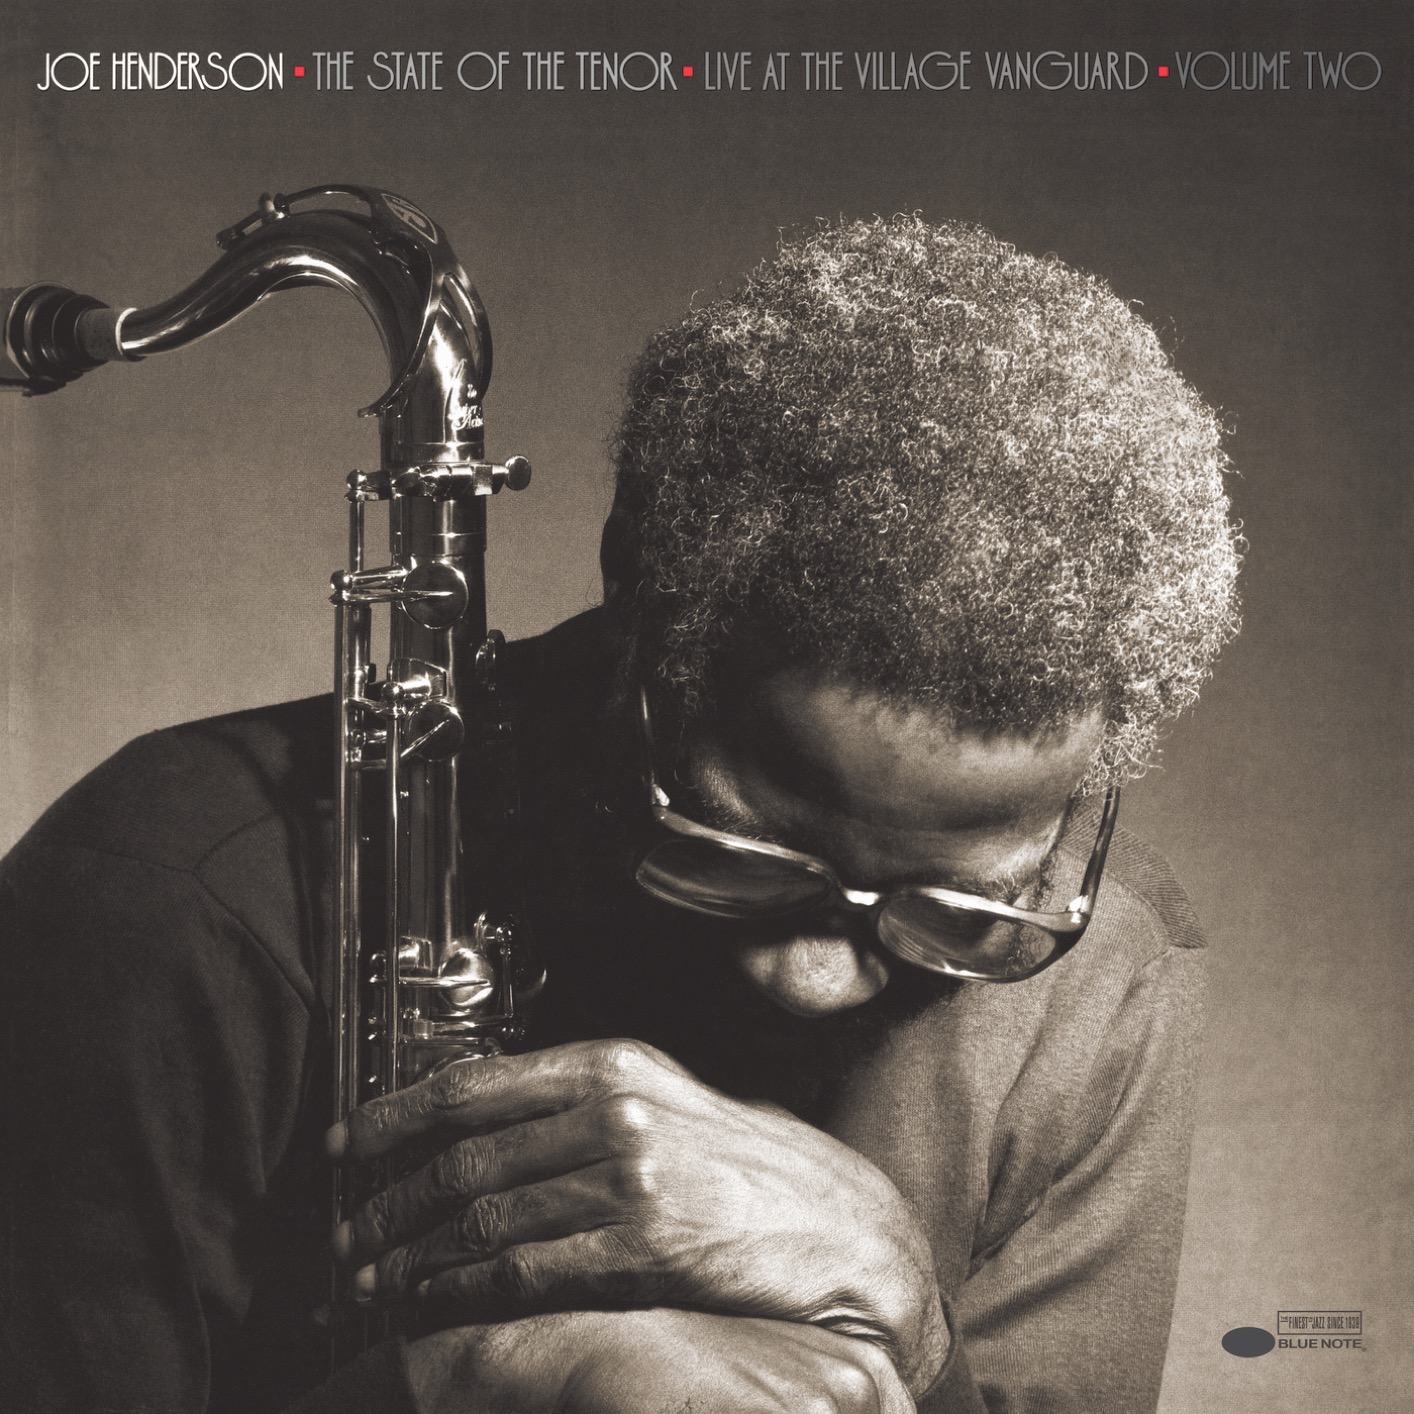 Joe Henderson - The State Of The Tenor (Remastered) (2019) [FLAC 24bit/96kHz]